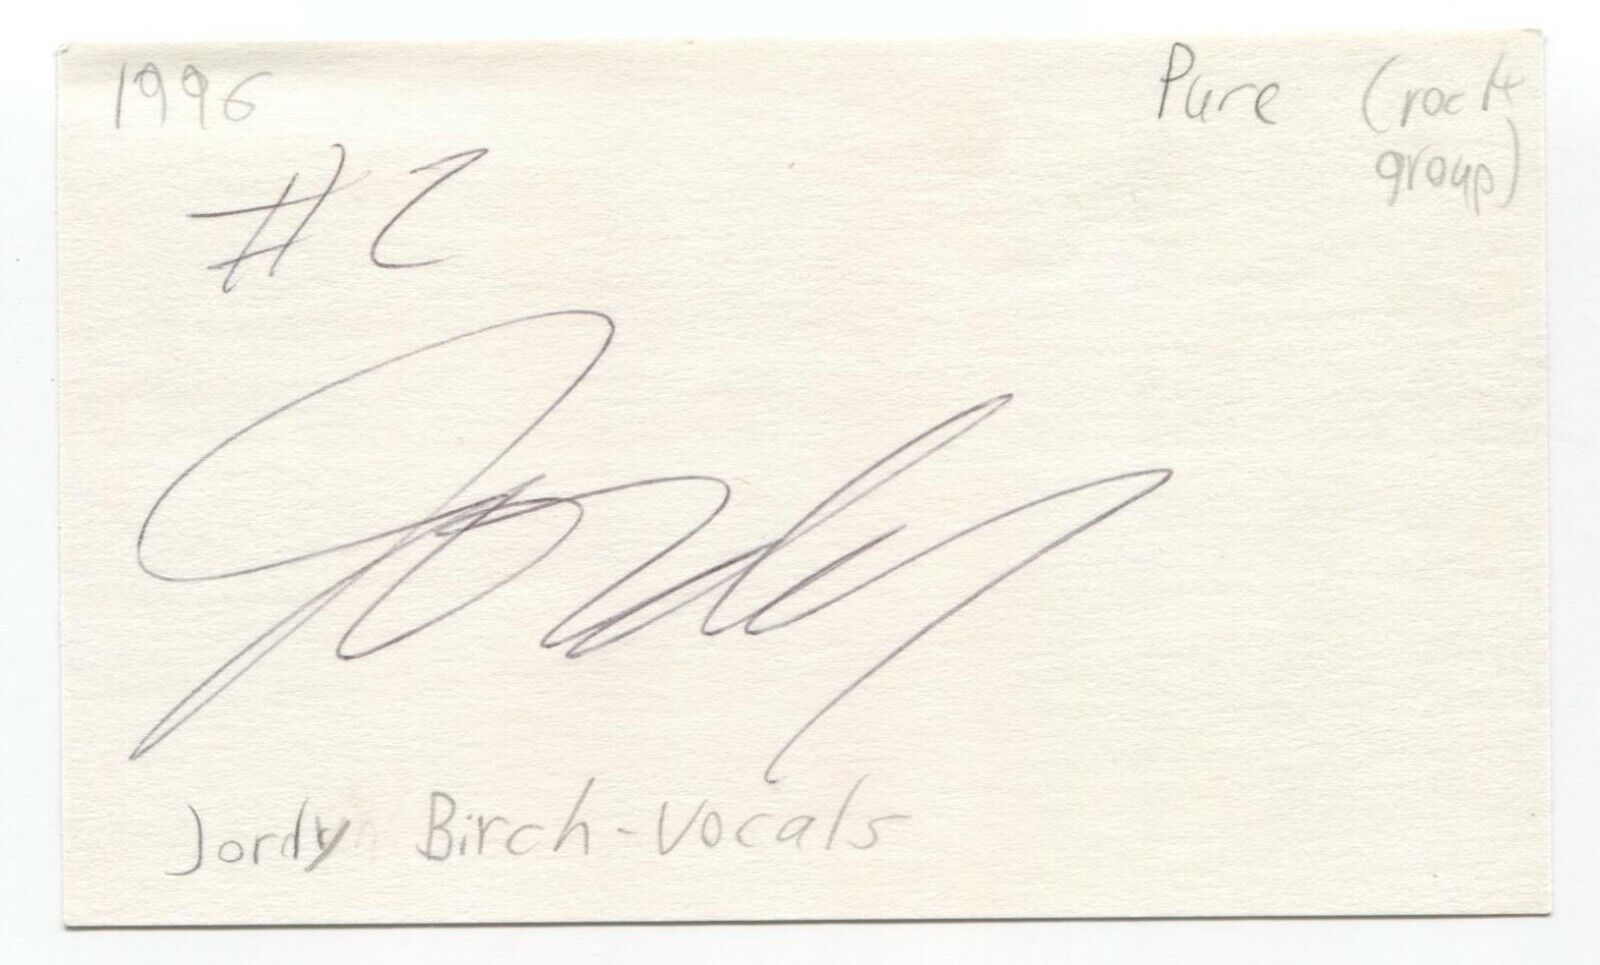 Pure - Jody Birch Signed 3x5 Index Card Autographed Signature Band